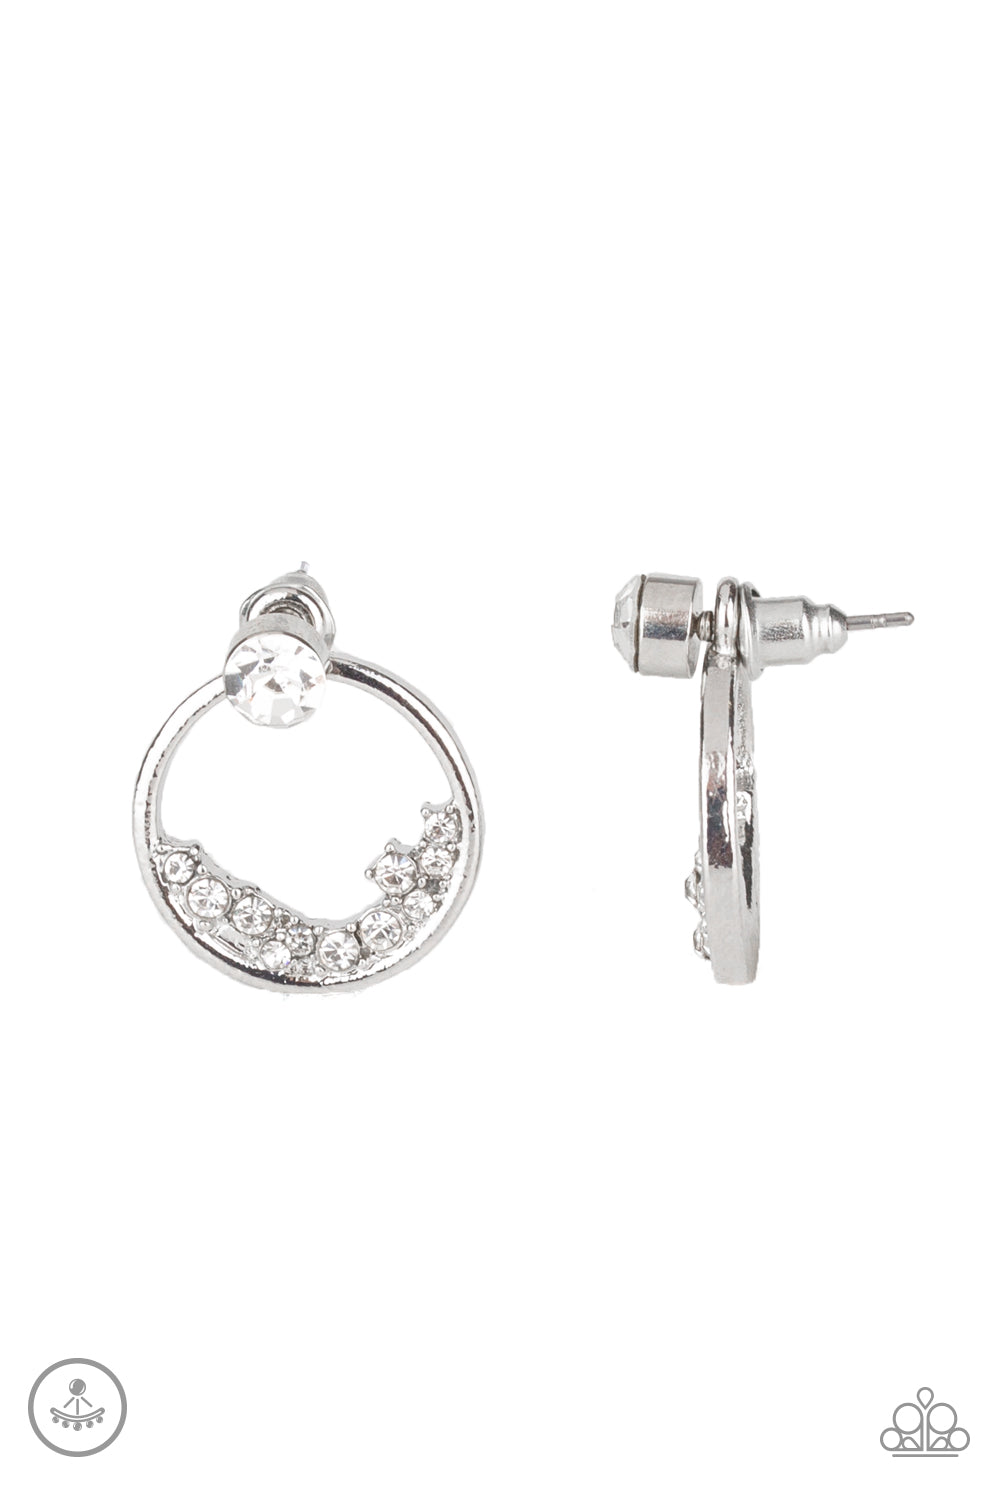 Rich Blitz - White Double Sided Earring - Princess Glam Shop